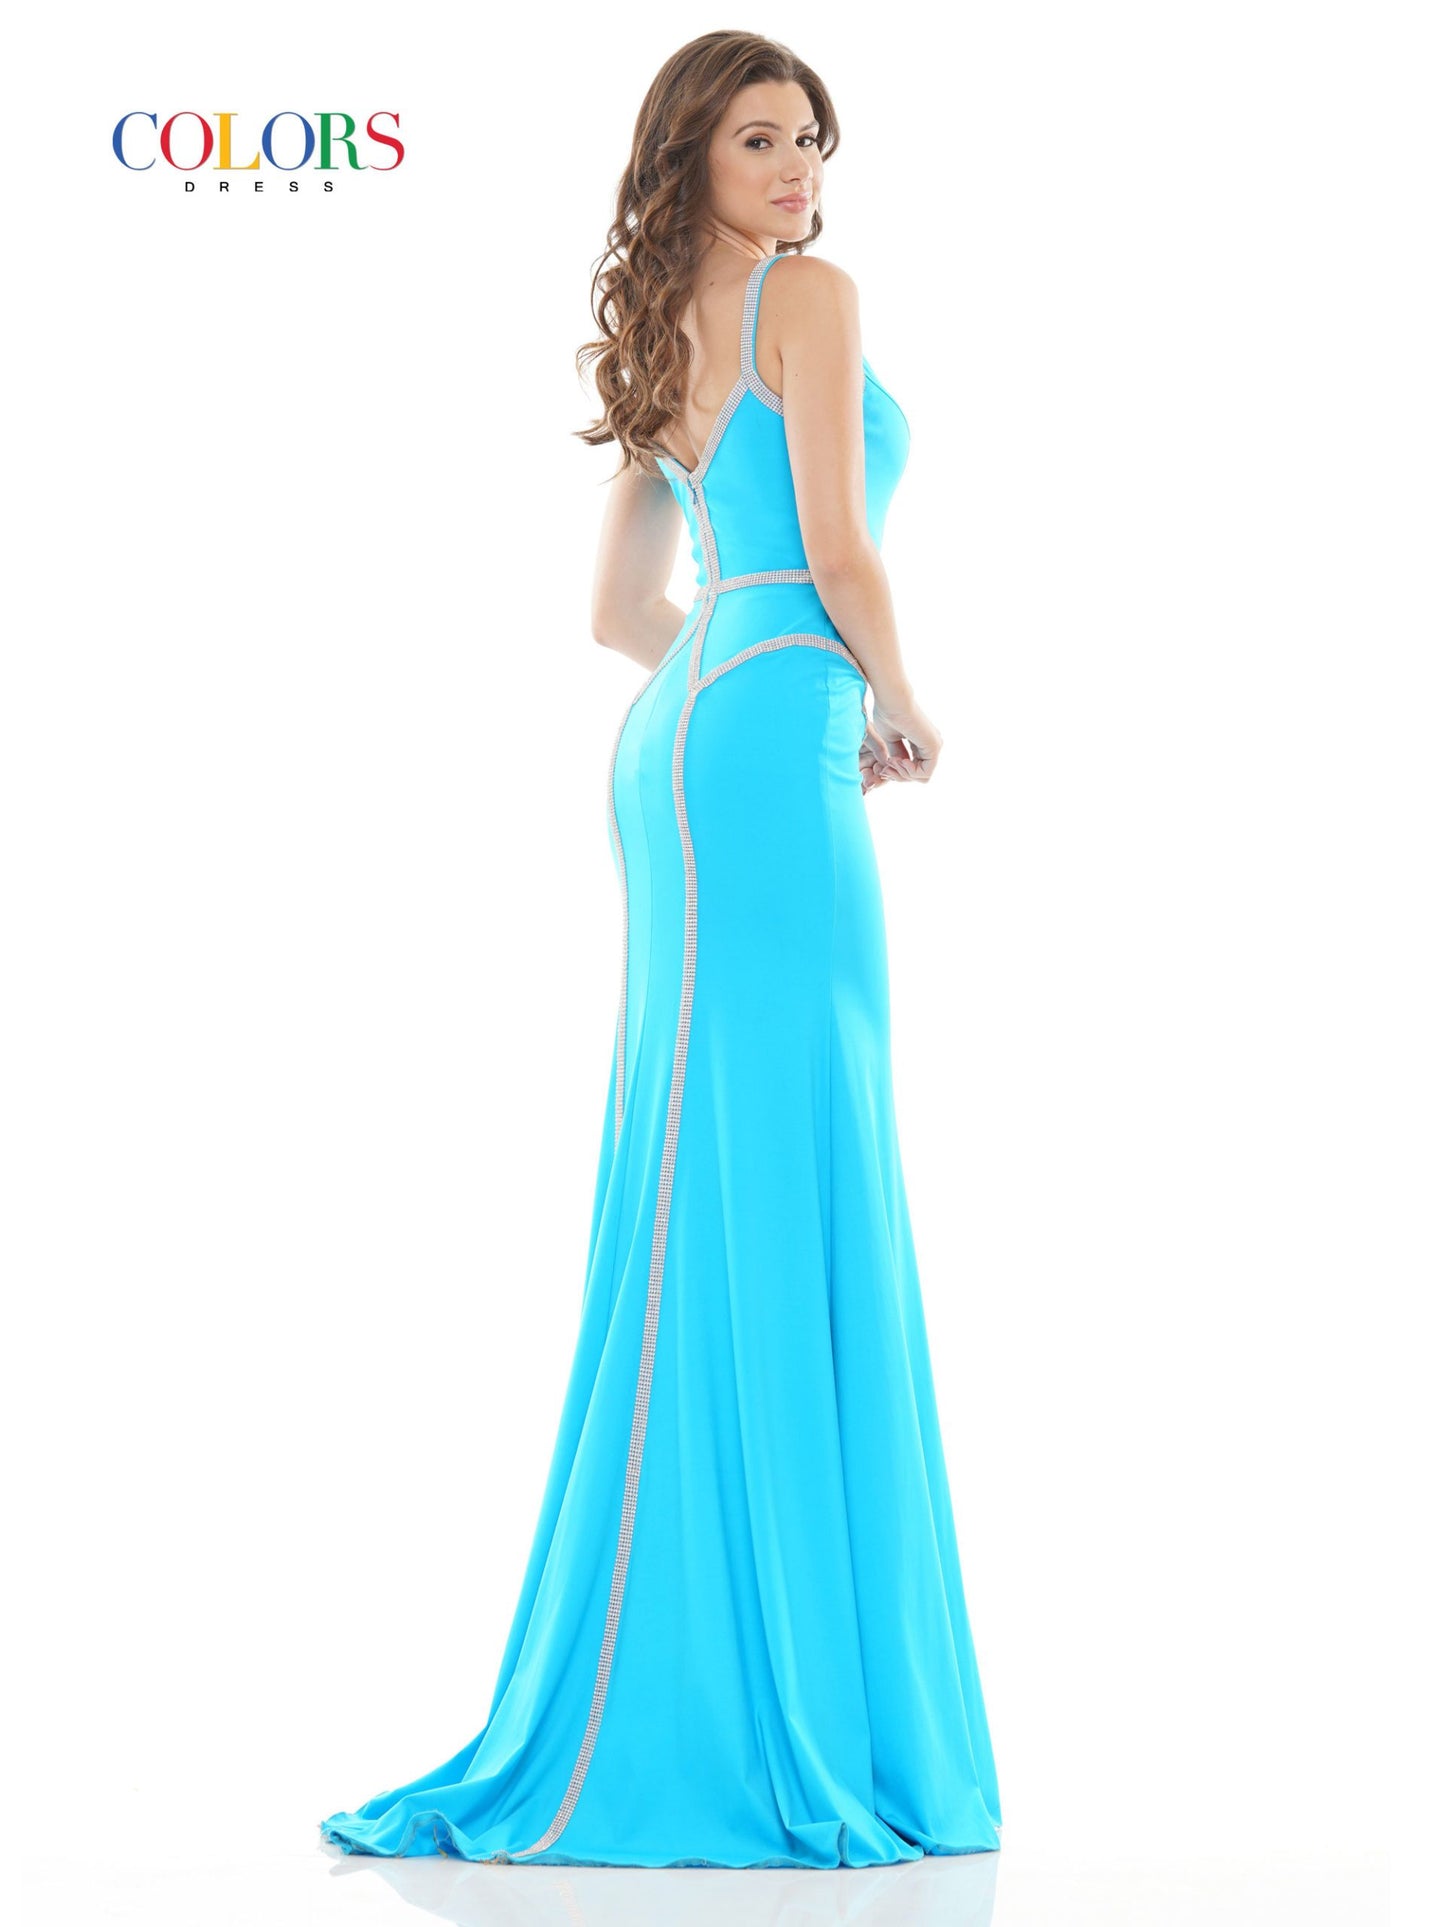 Colors 2696 Long Fitted Crystal Embellished V Neck Prom Dress Pageant Gown   Colors: Red, Hot Pink, Turquoise Sizes: 0-22